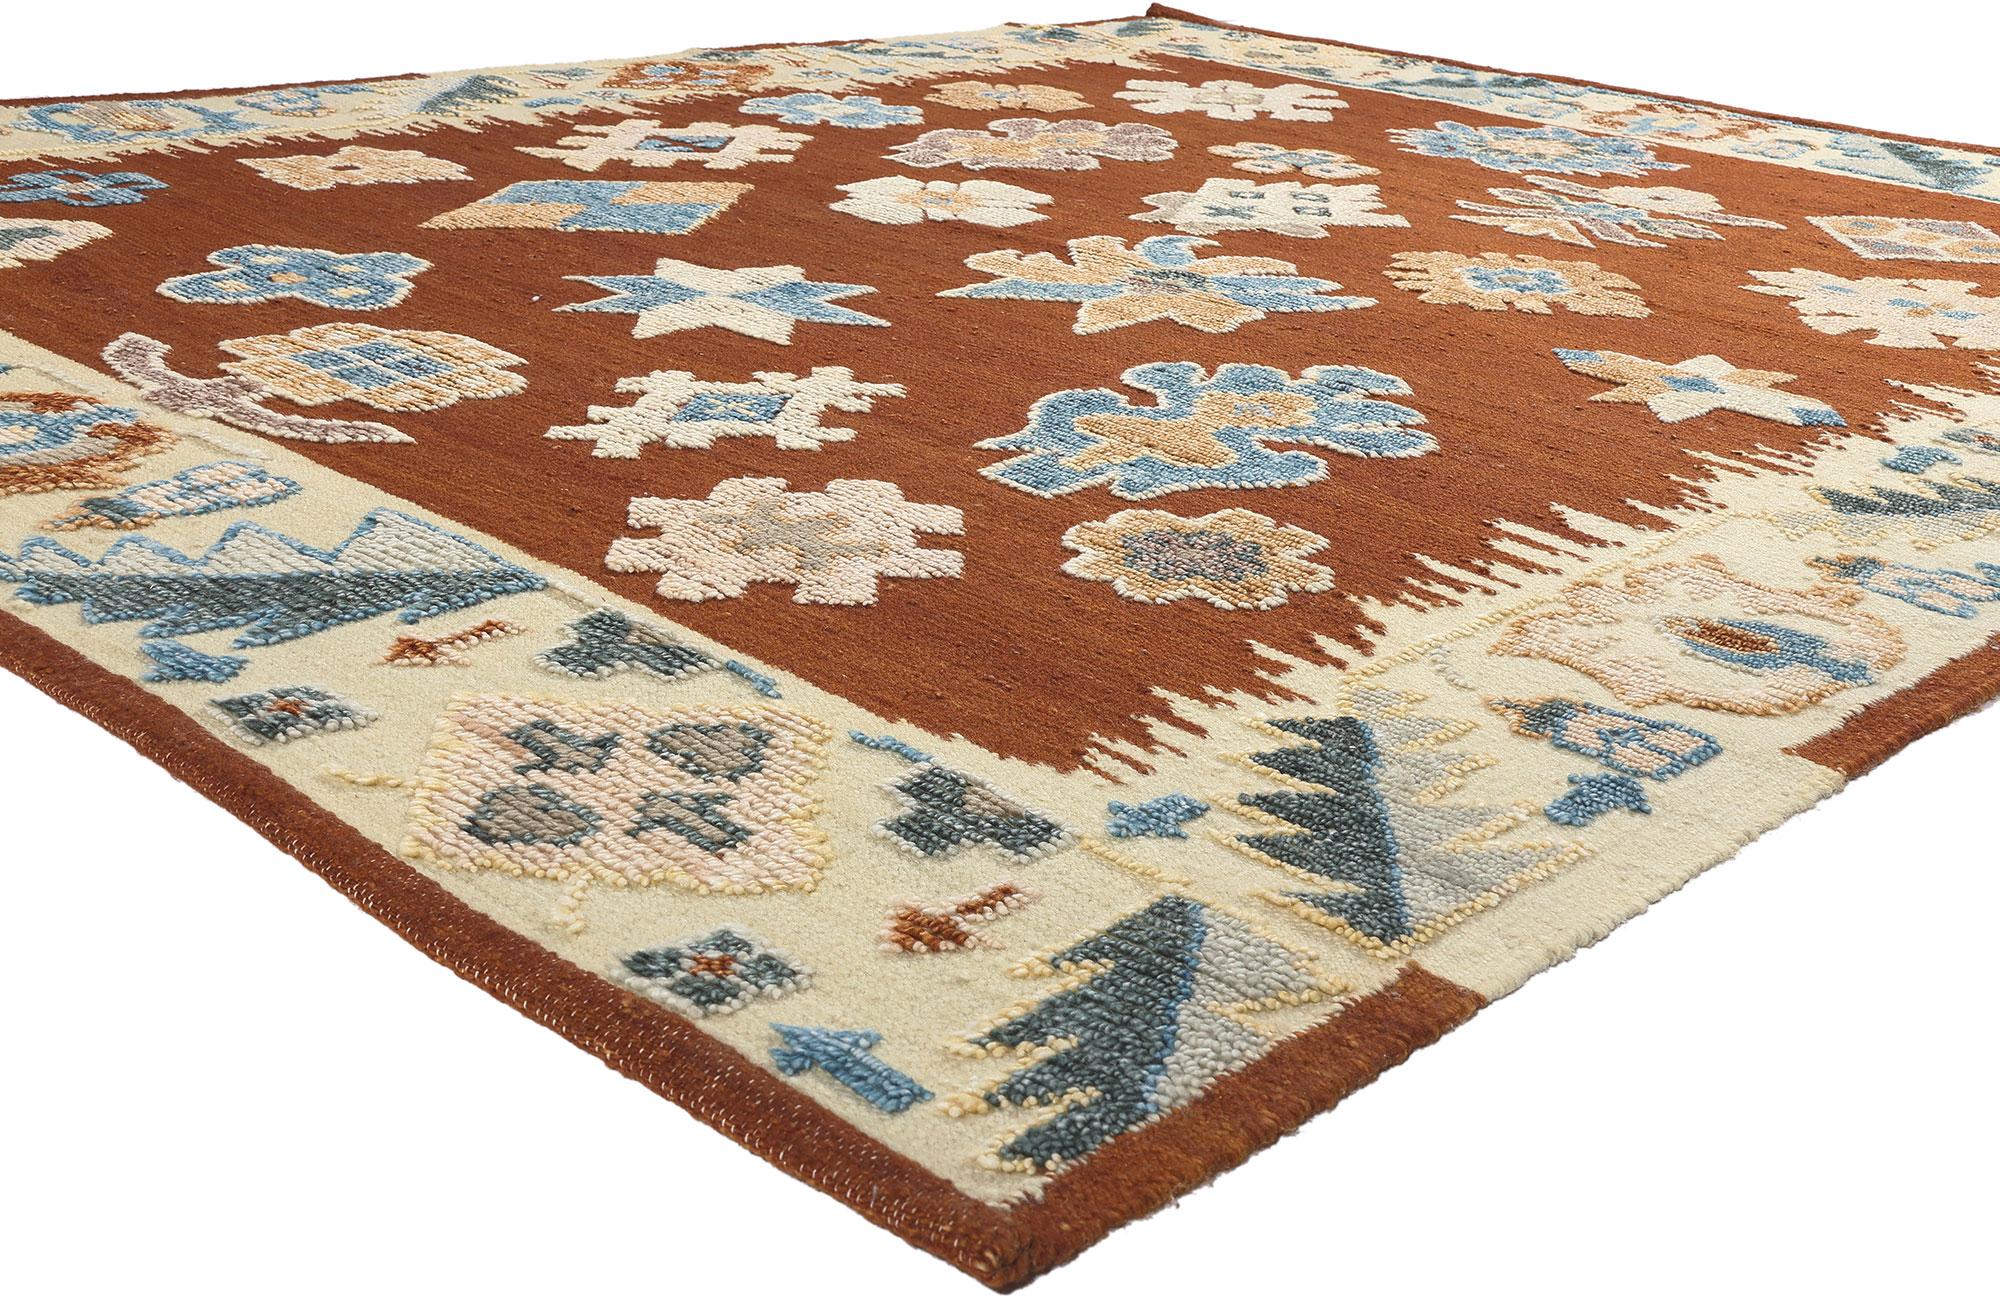 30895 New Modern Style Oushak High-Low Rug, 08'04 x 10'05. Presenting an exquisite high and low textured Oushak rug that embodies contemporary elegance and modern charm. Revel in the intricacies of its raised design, a testament to impeccable detail